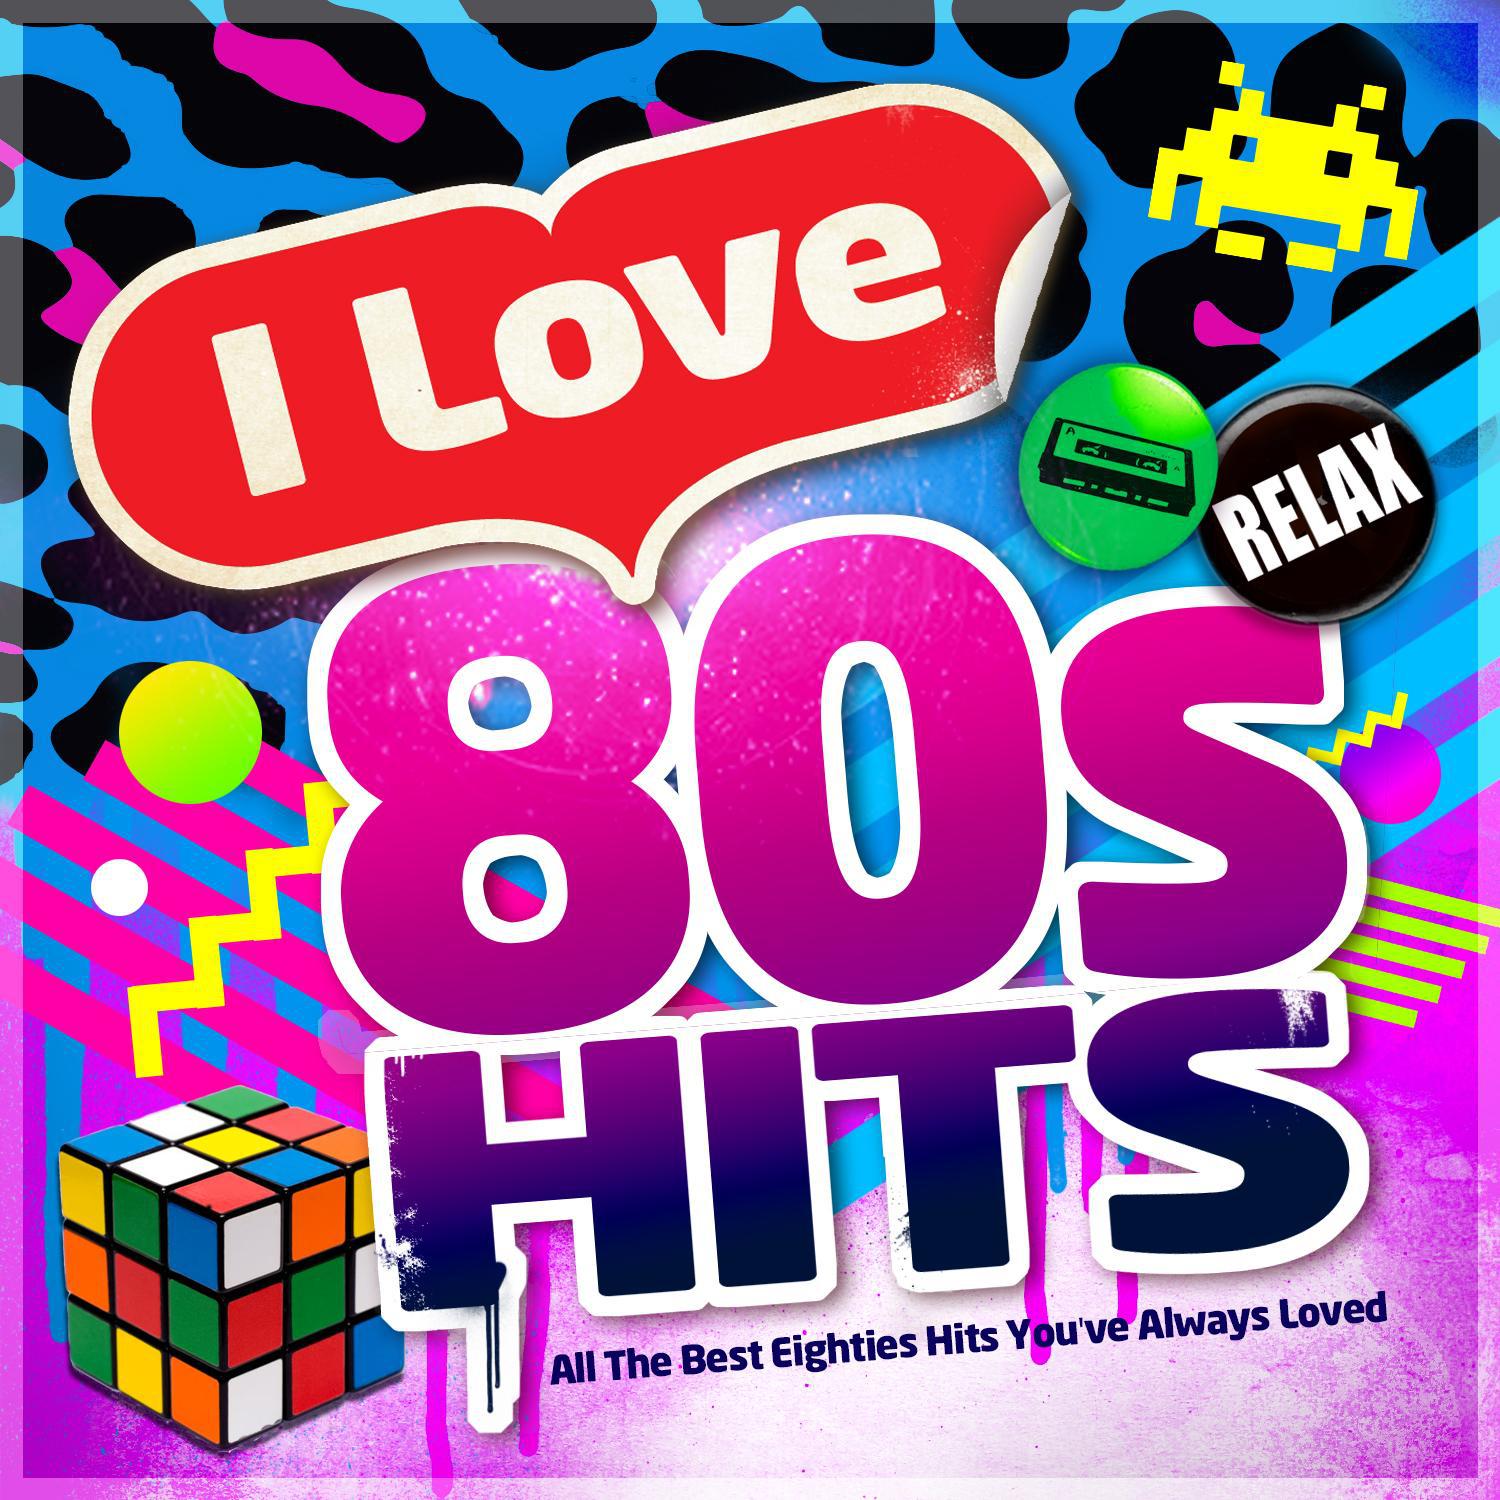 I Love 80's Hits - All the Best Eighties Hits You've Always Loved